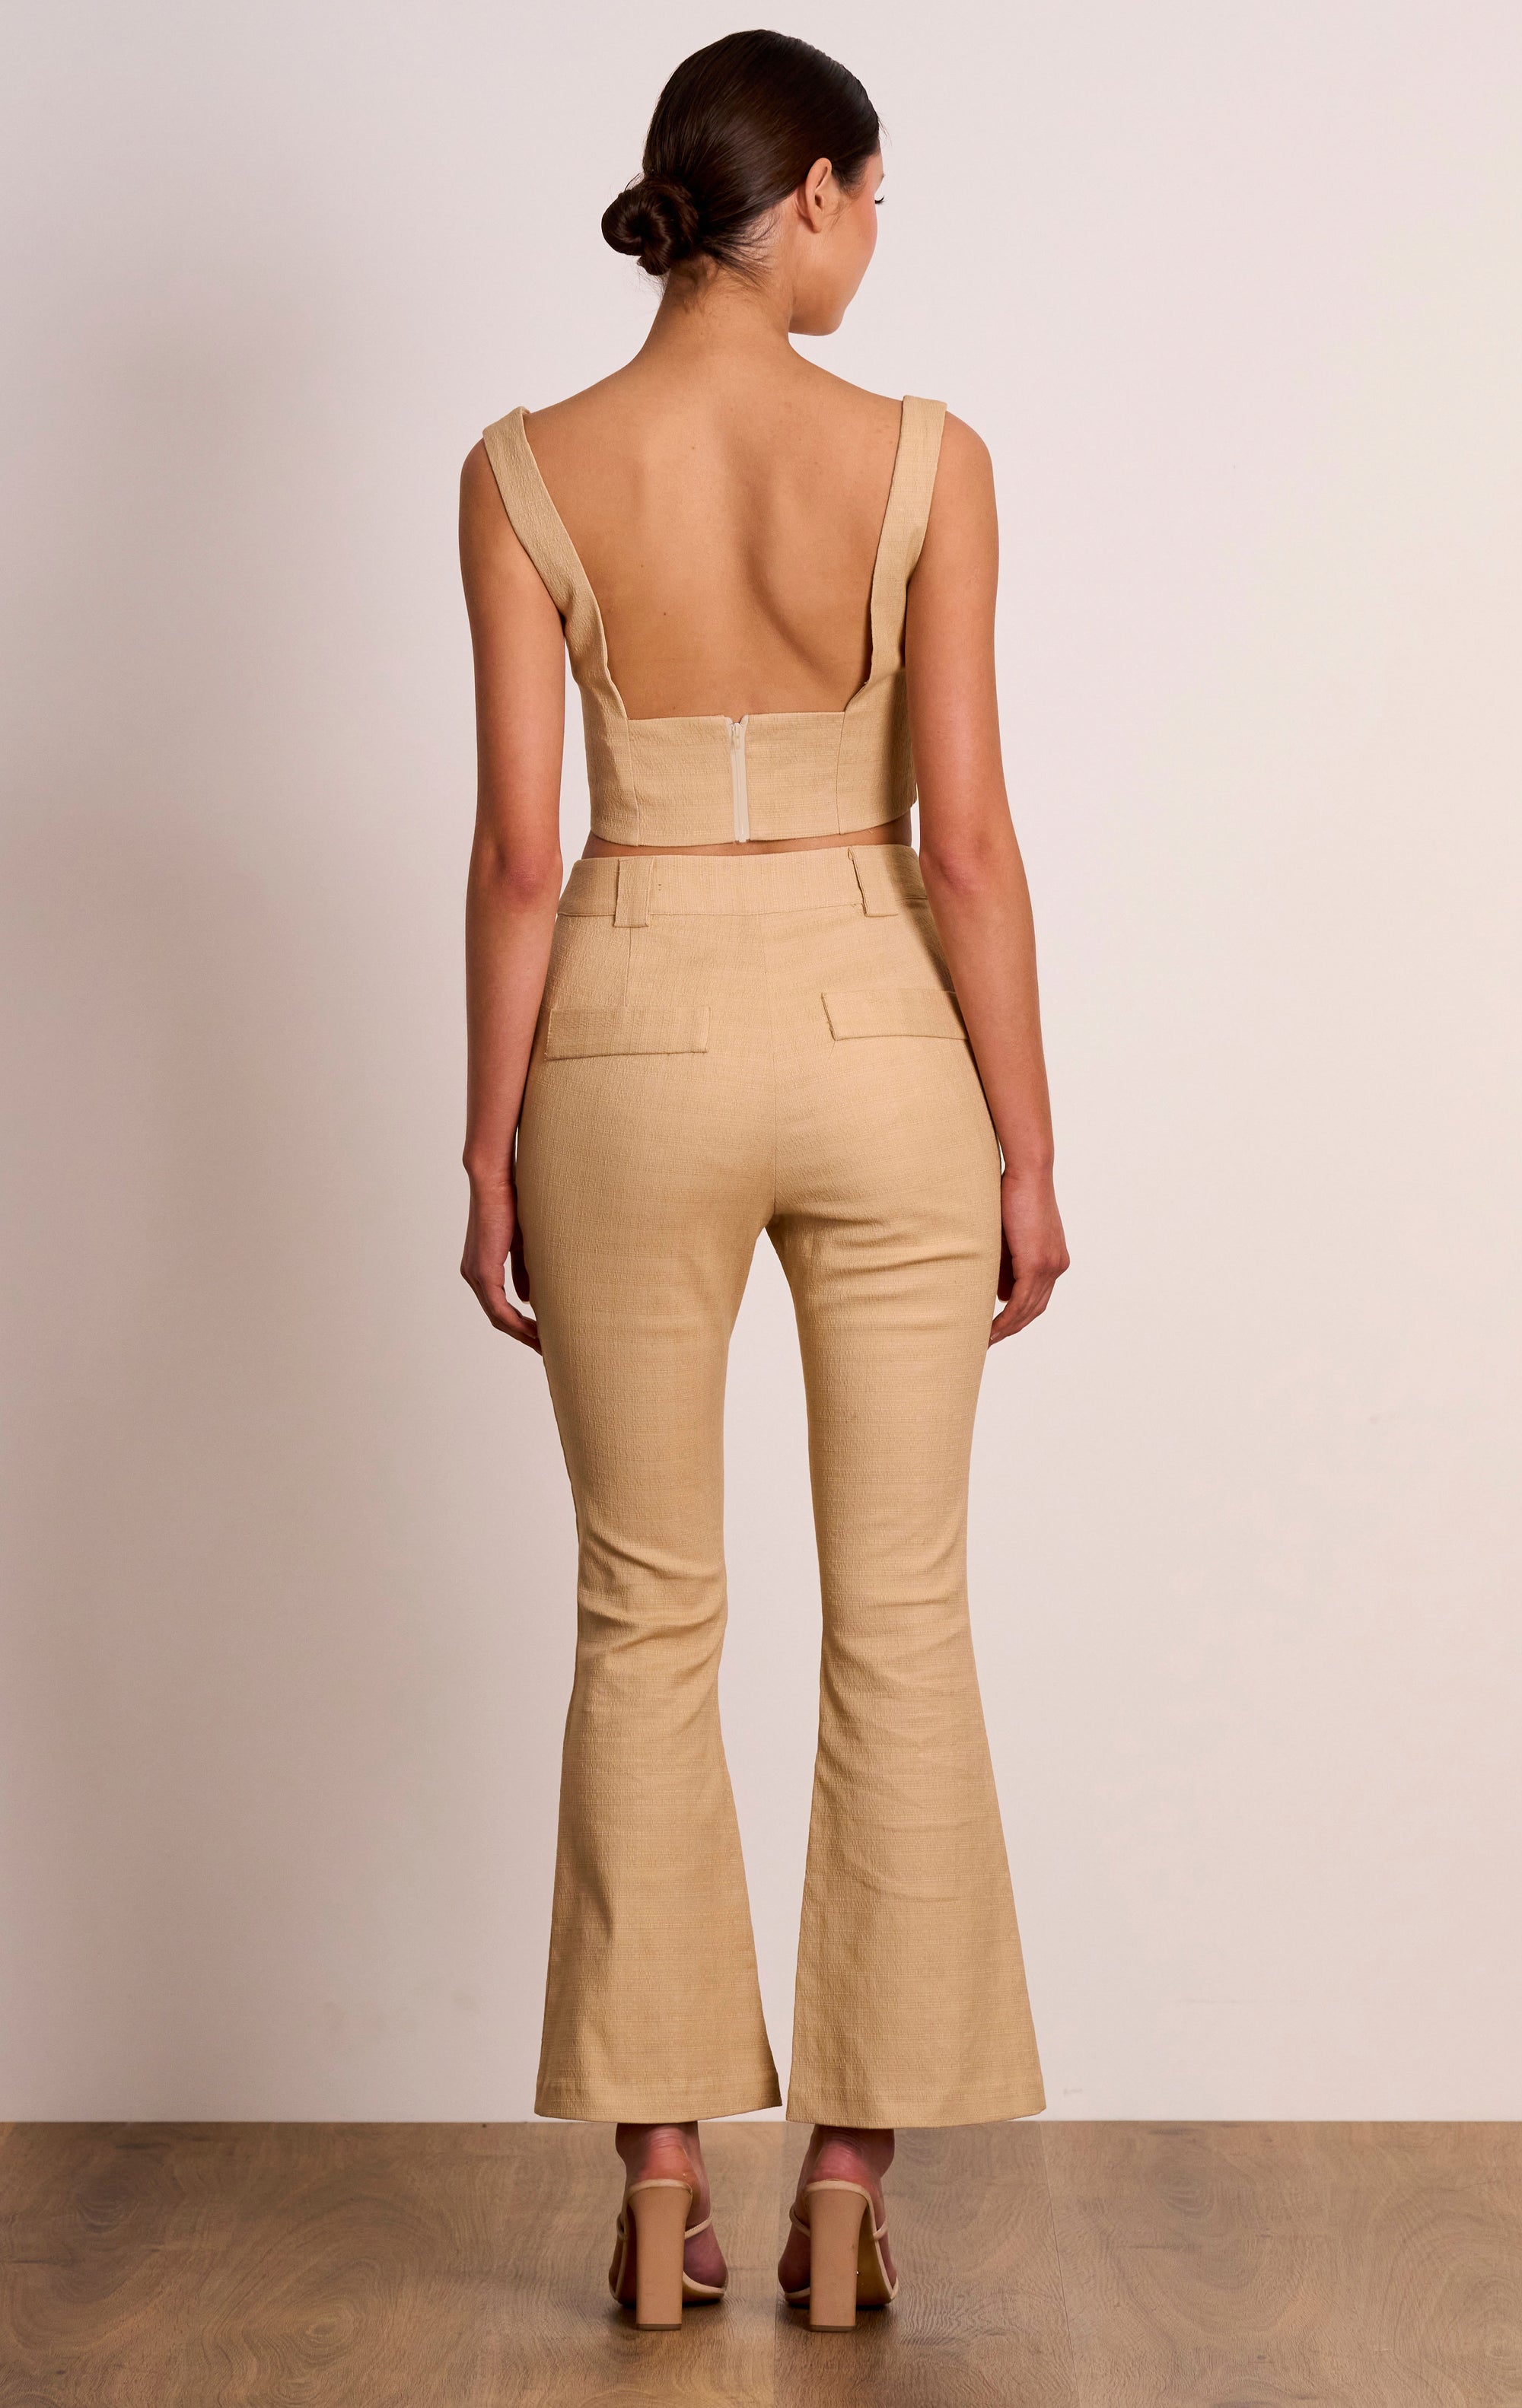 Fever Pant - TAKE 40% OFF DISCOUNT APPLIED AT CHECKOUT